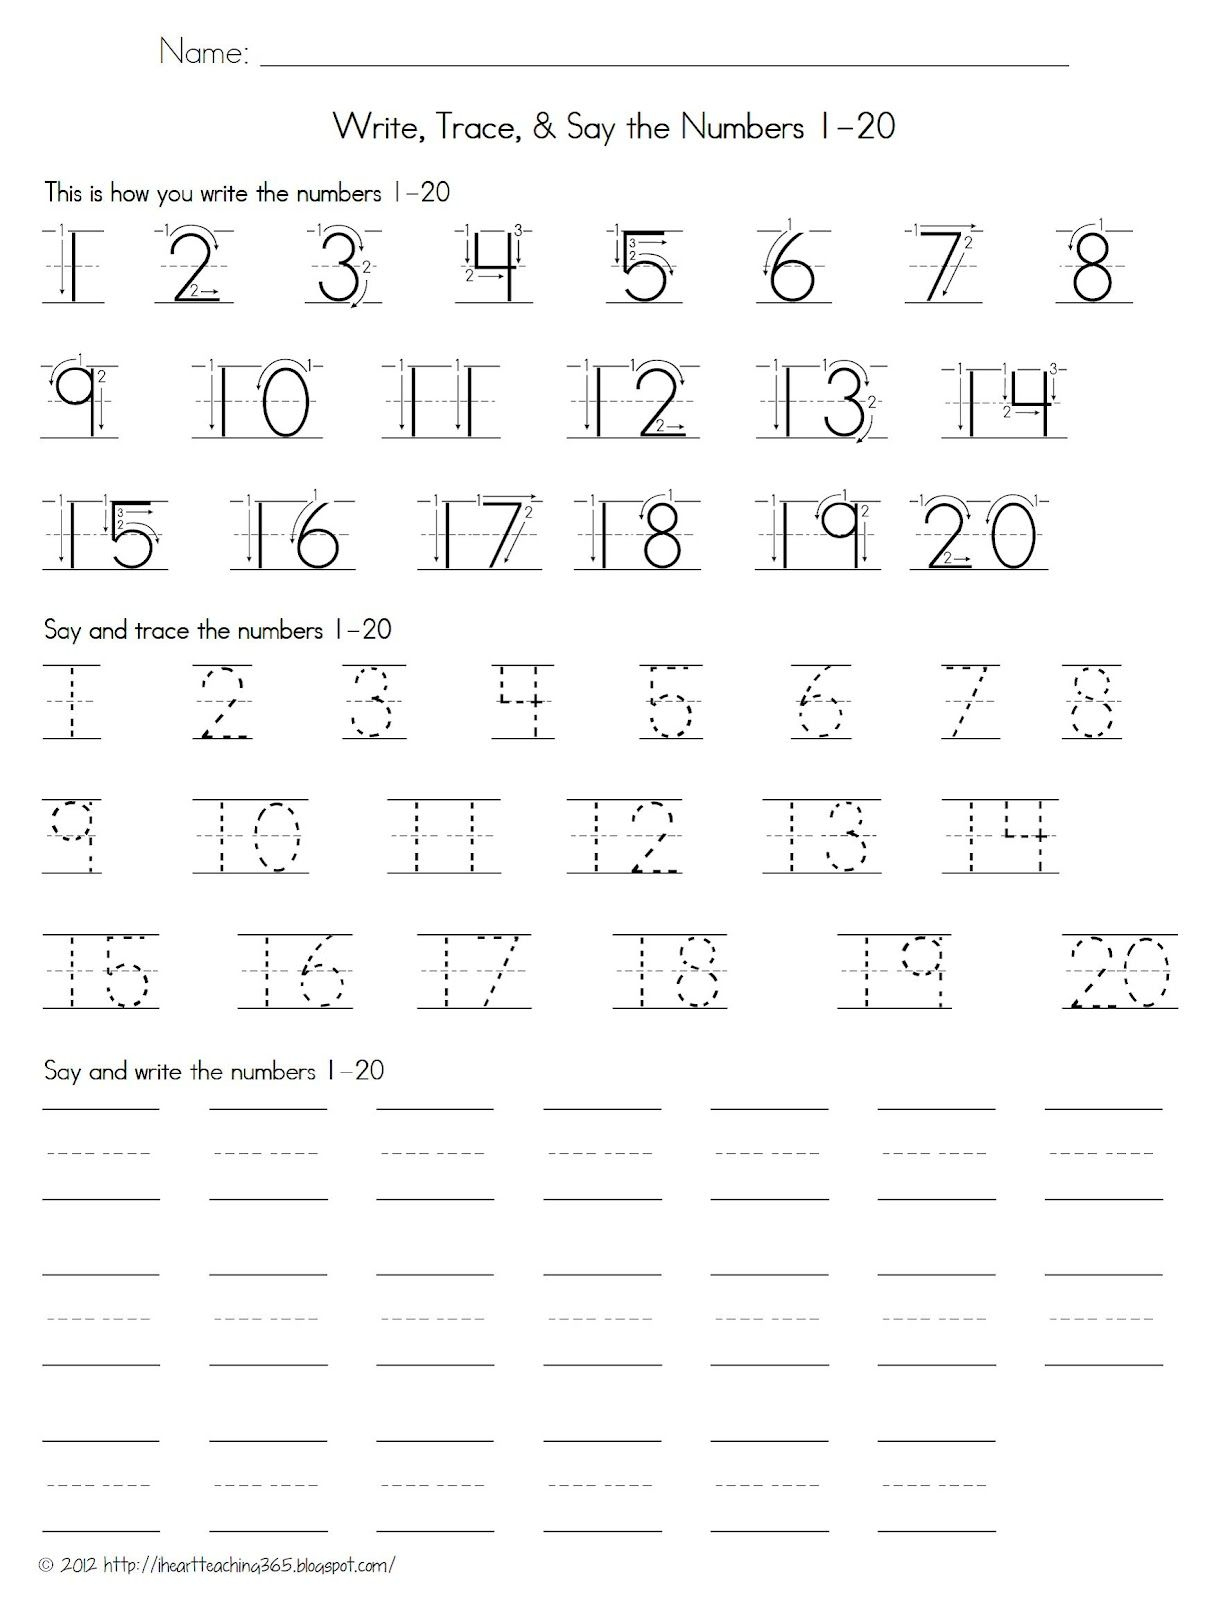 Tracing Numbers 1-20 With Directional Arrows. | Handwriting - Free Printable Tracing Numbers 1 20 Worksheets